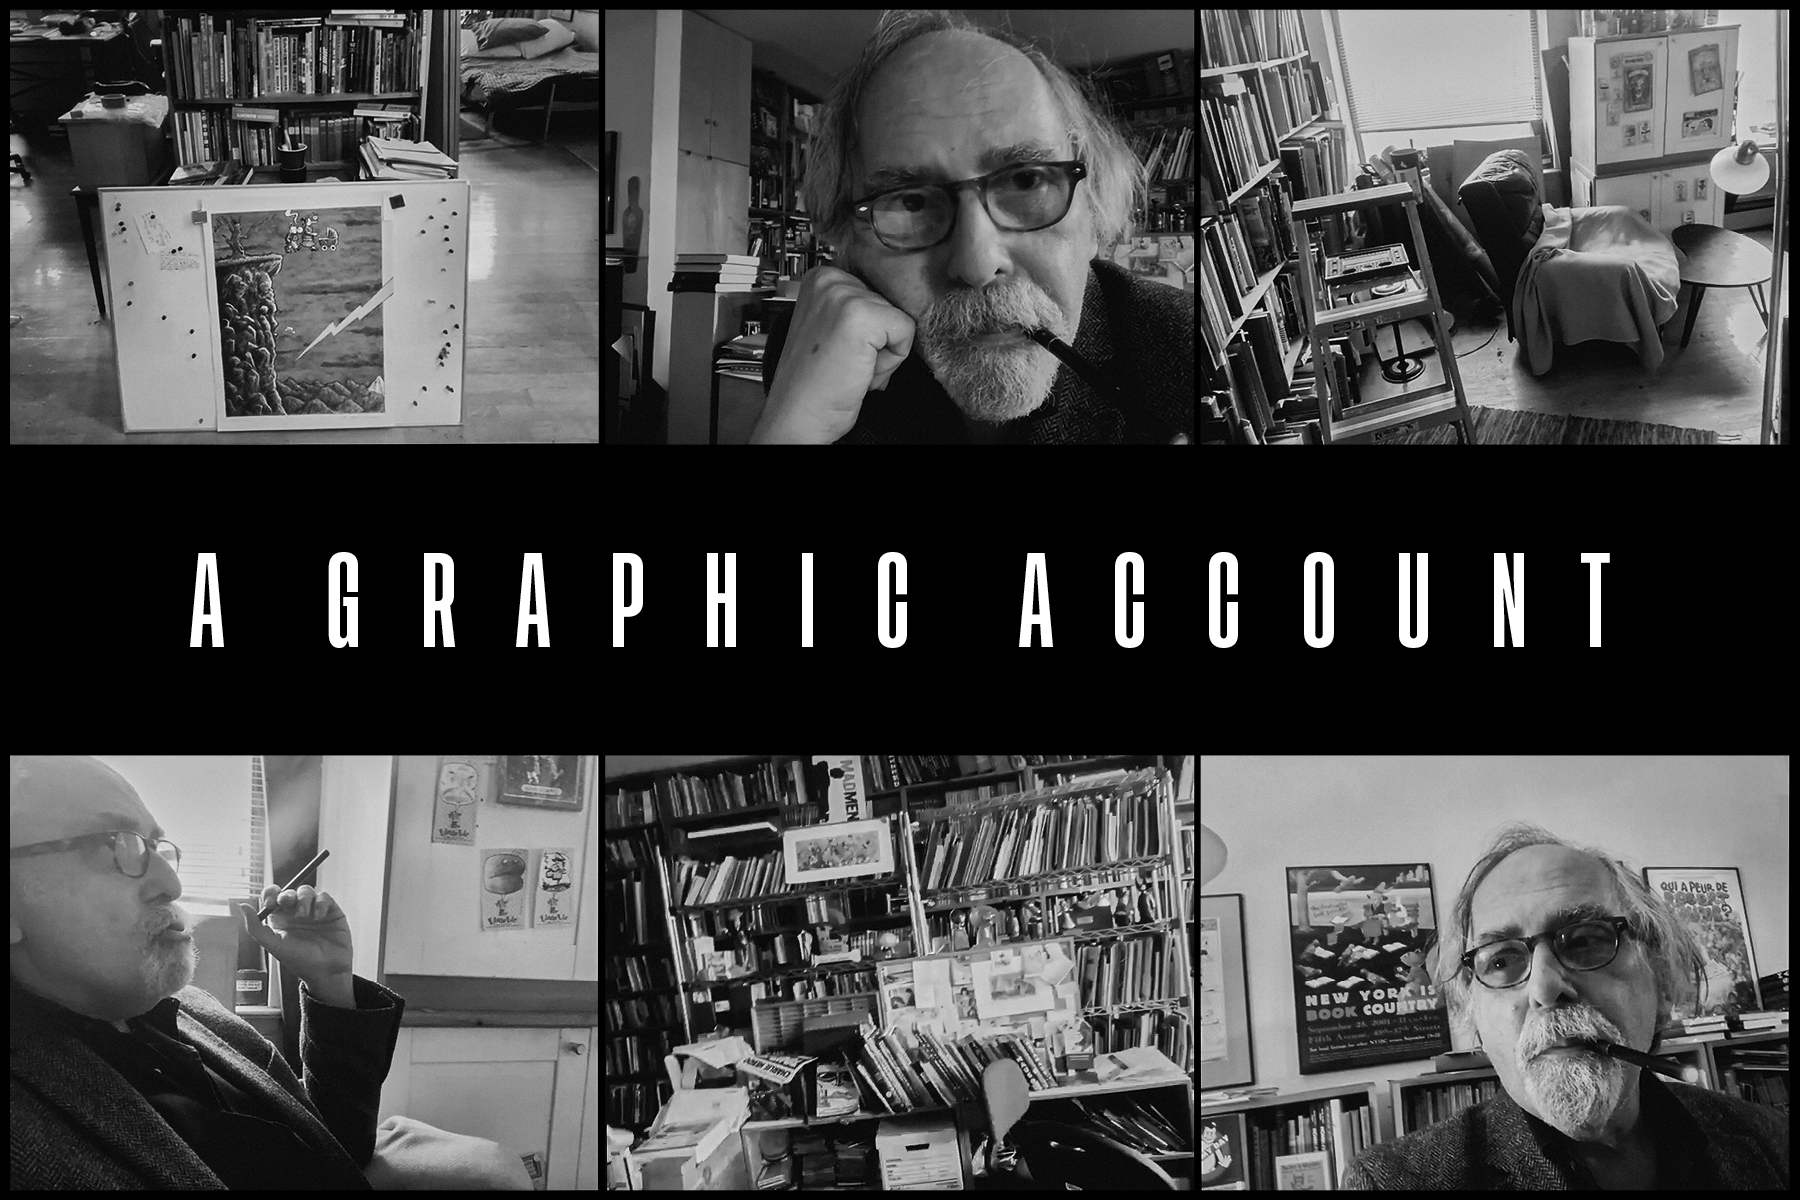 A collection of black and white portraits of Art Spiegelman and his studio